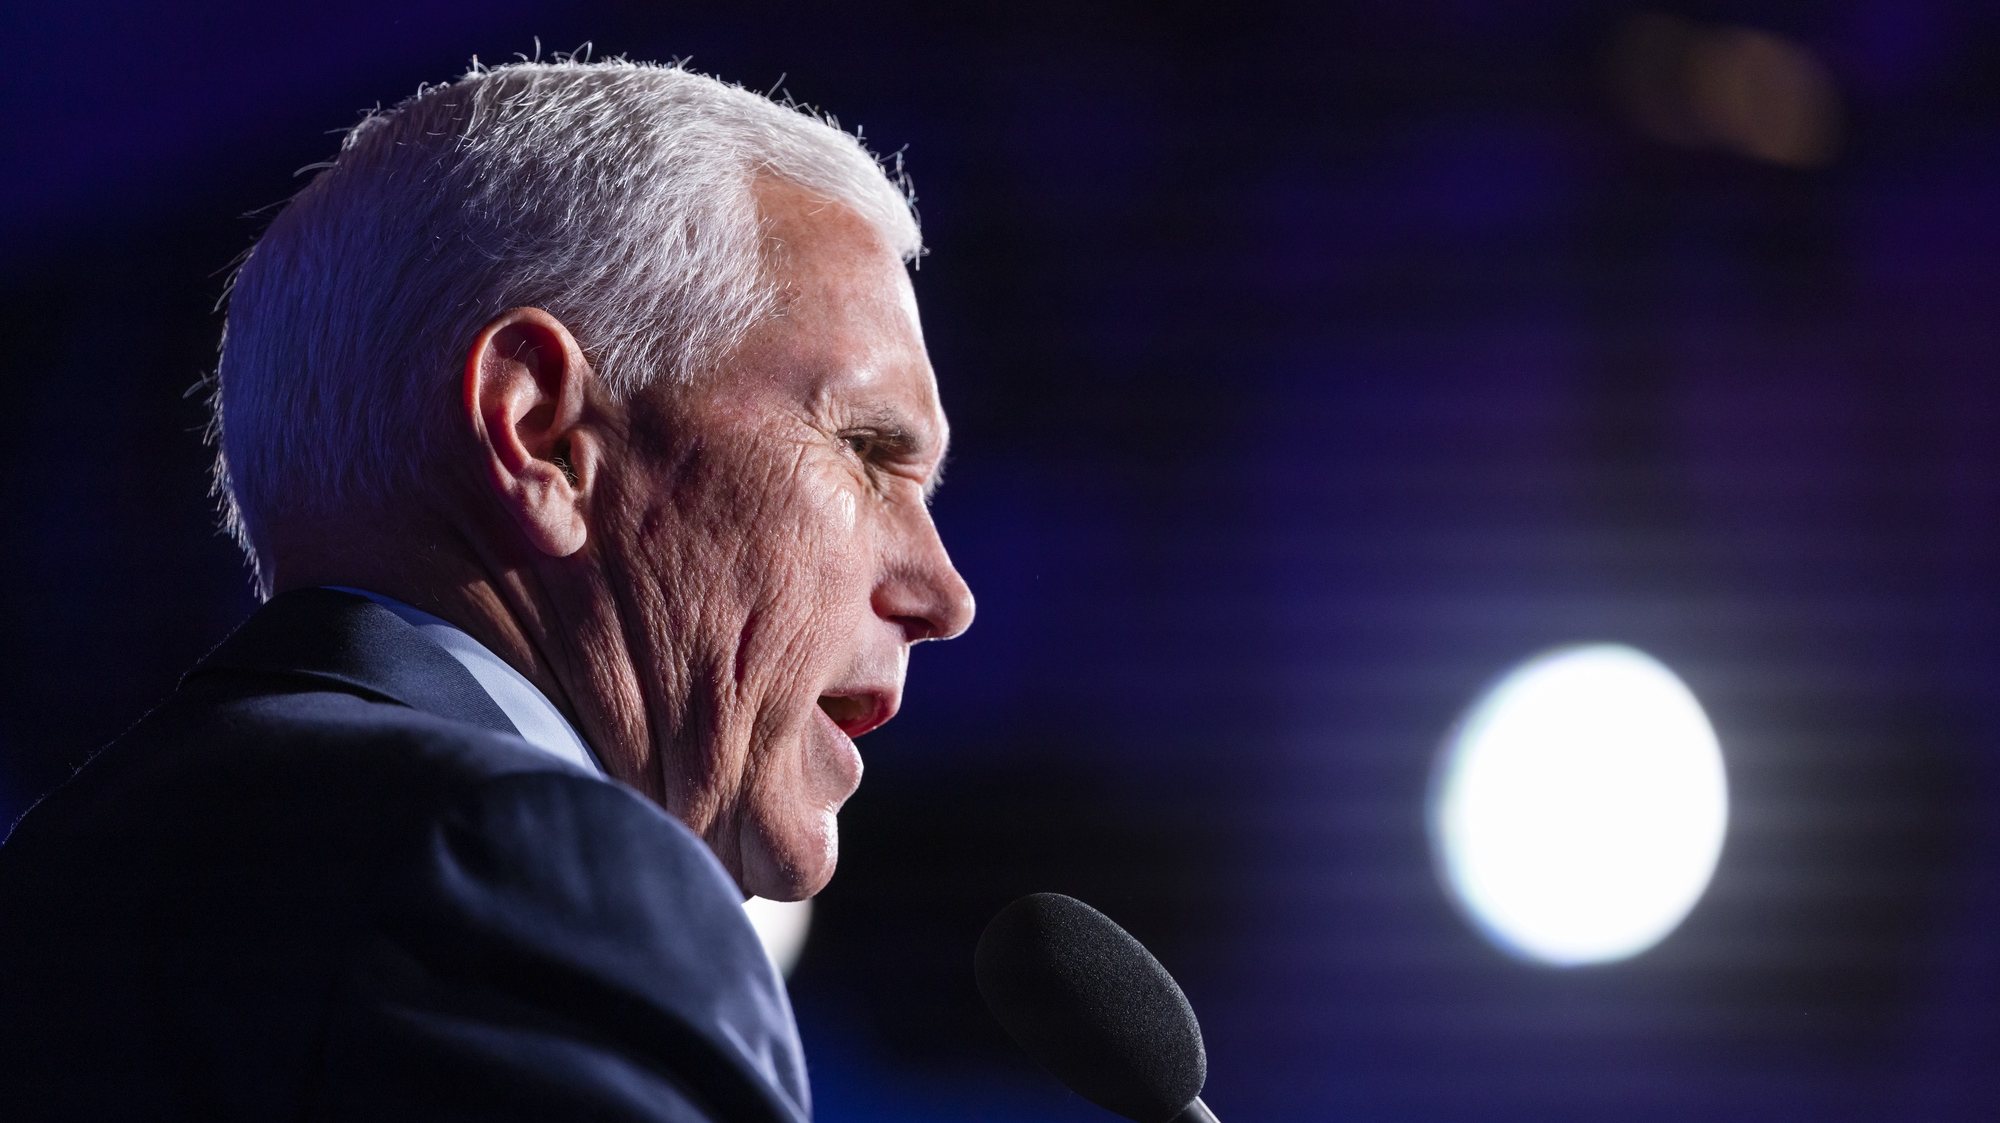 epa10092300 Former US Vice President Mike Pence addresses the National Conservative Student Conference in Washington, DC, USA, 26 July 2022. Pence is speaking in DC the same day as former US President Donald Trump, who will address the America First Agenda Summit.  EPA/JIM LO SCALZO